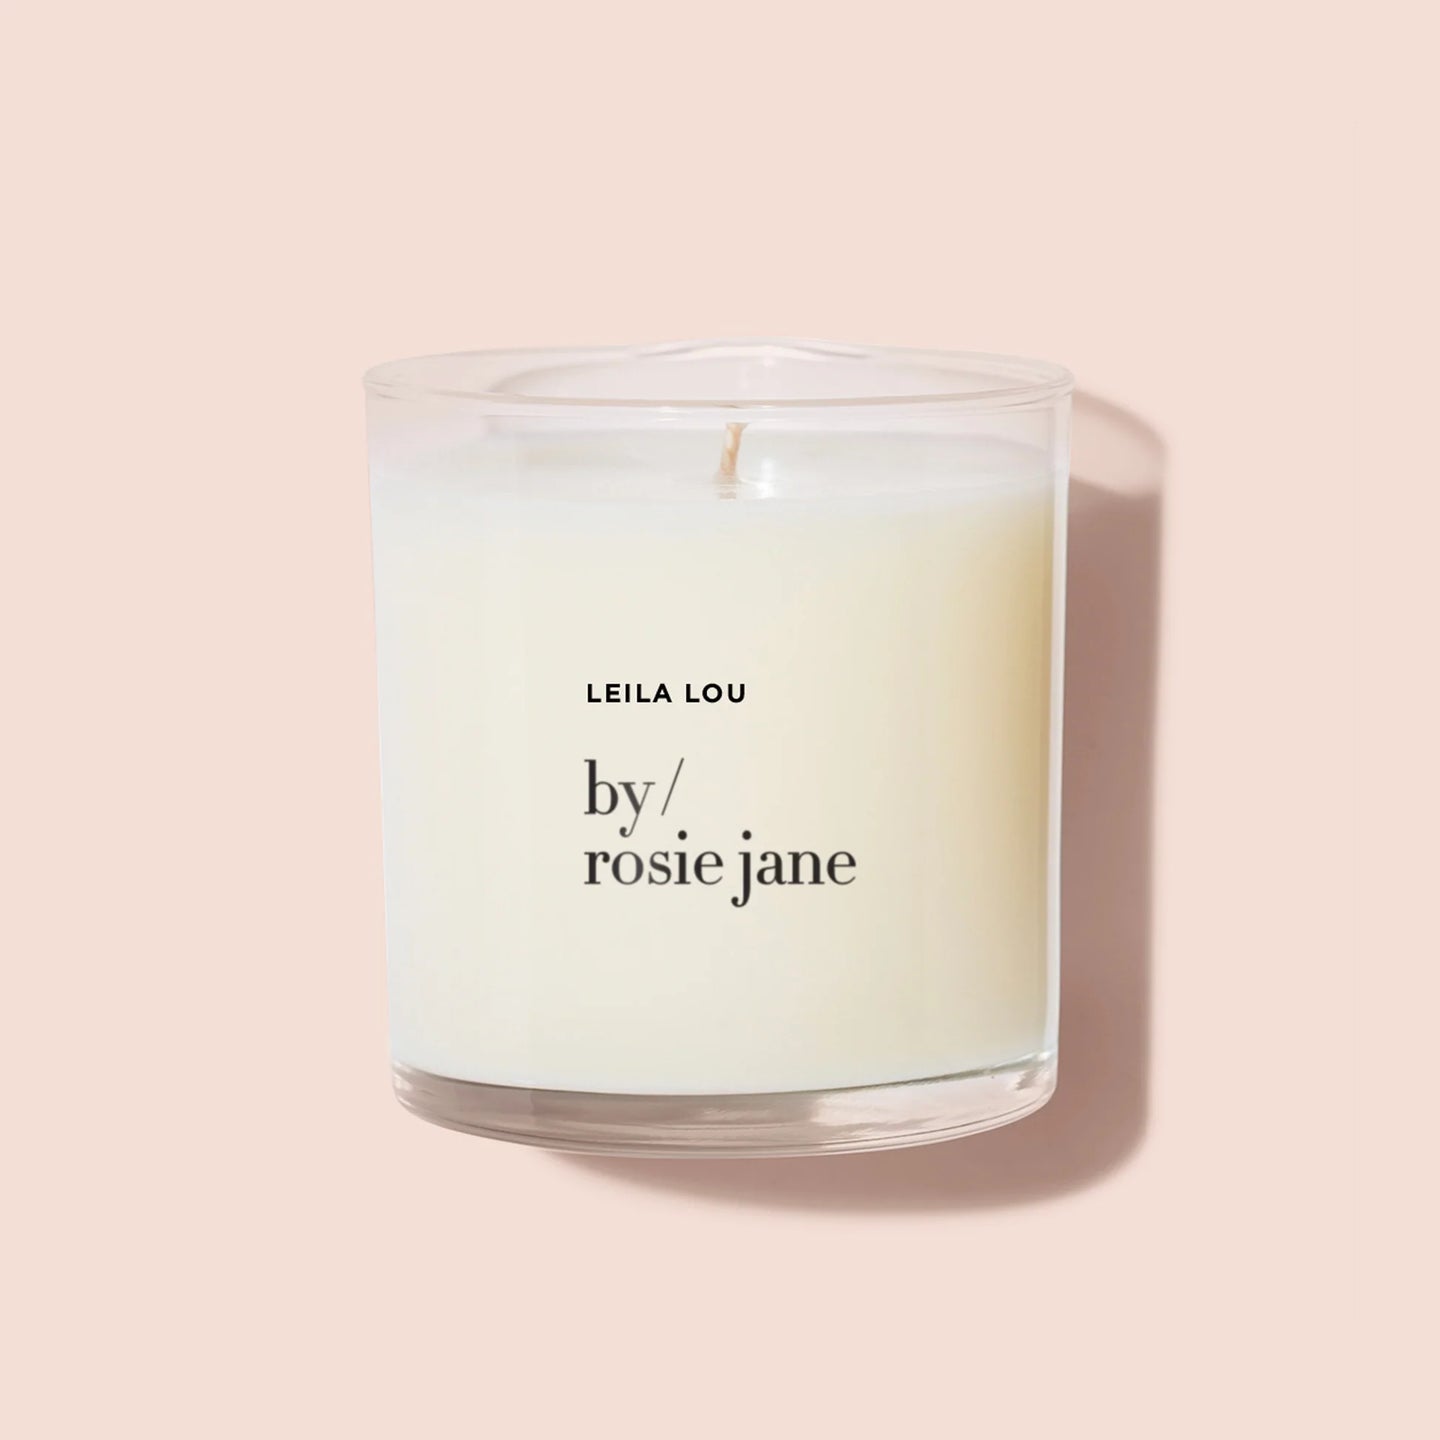 By Rosie Jane Candle - Leila Lou